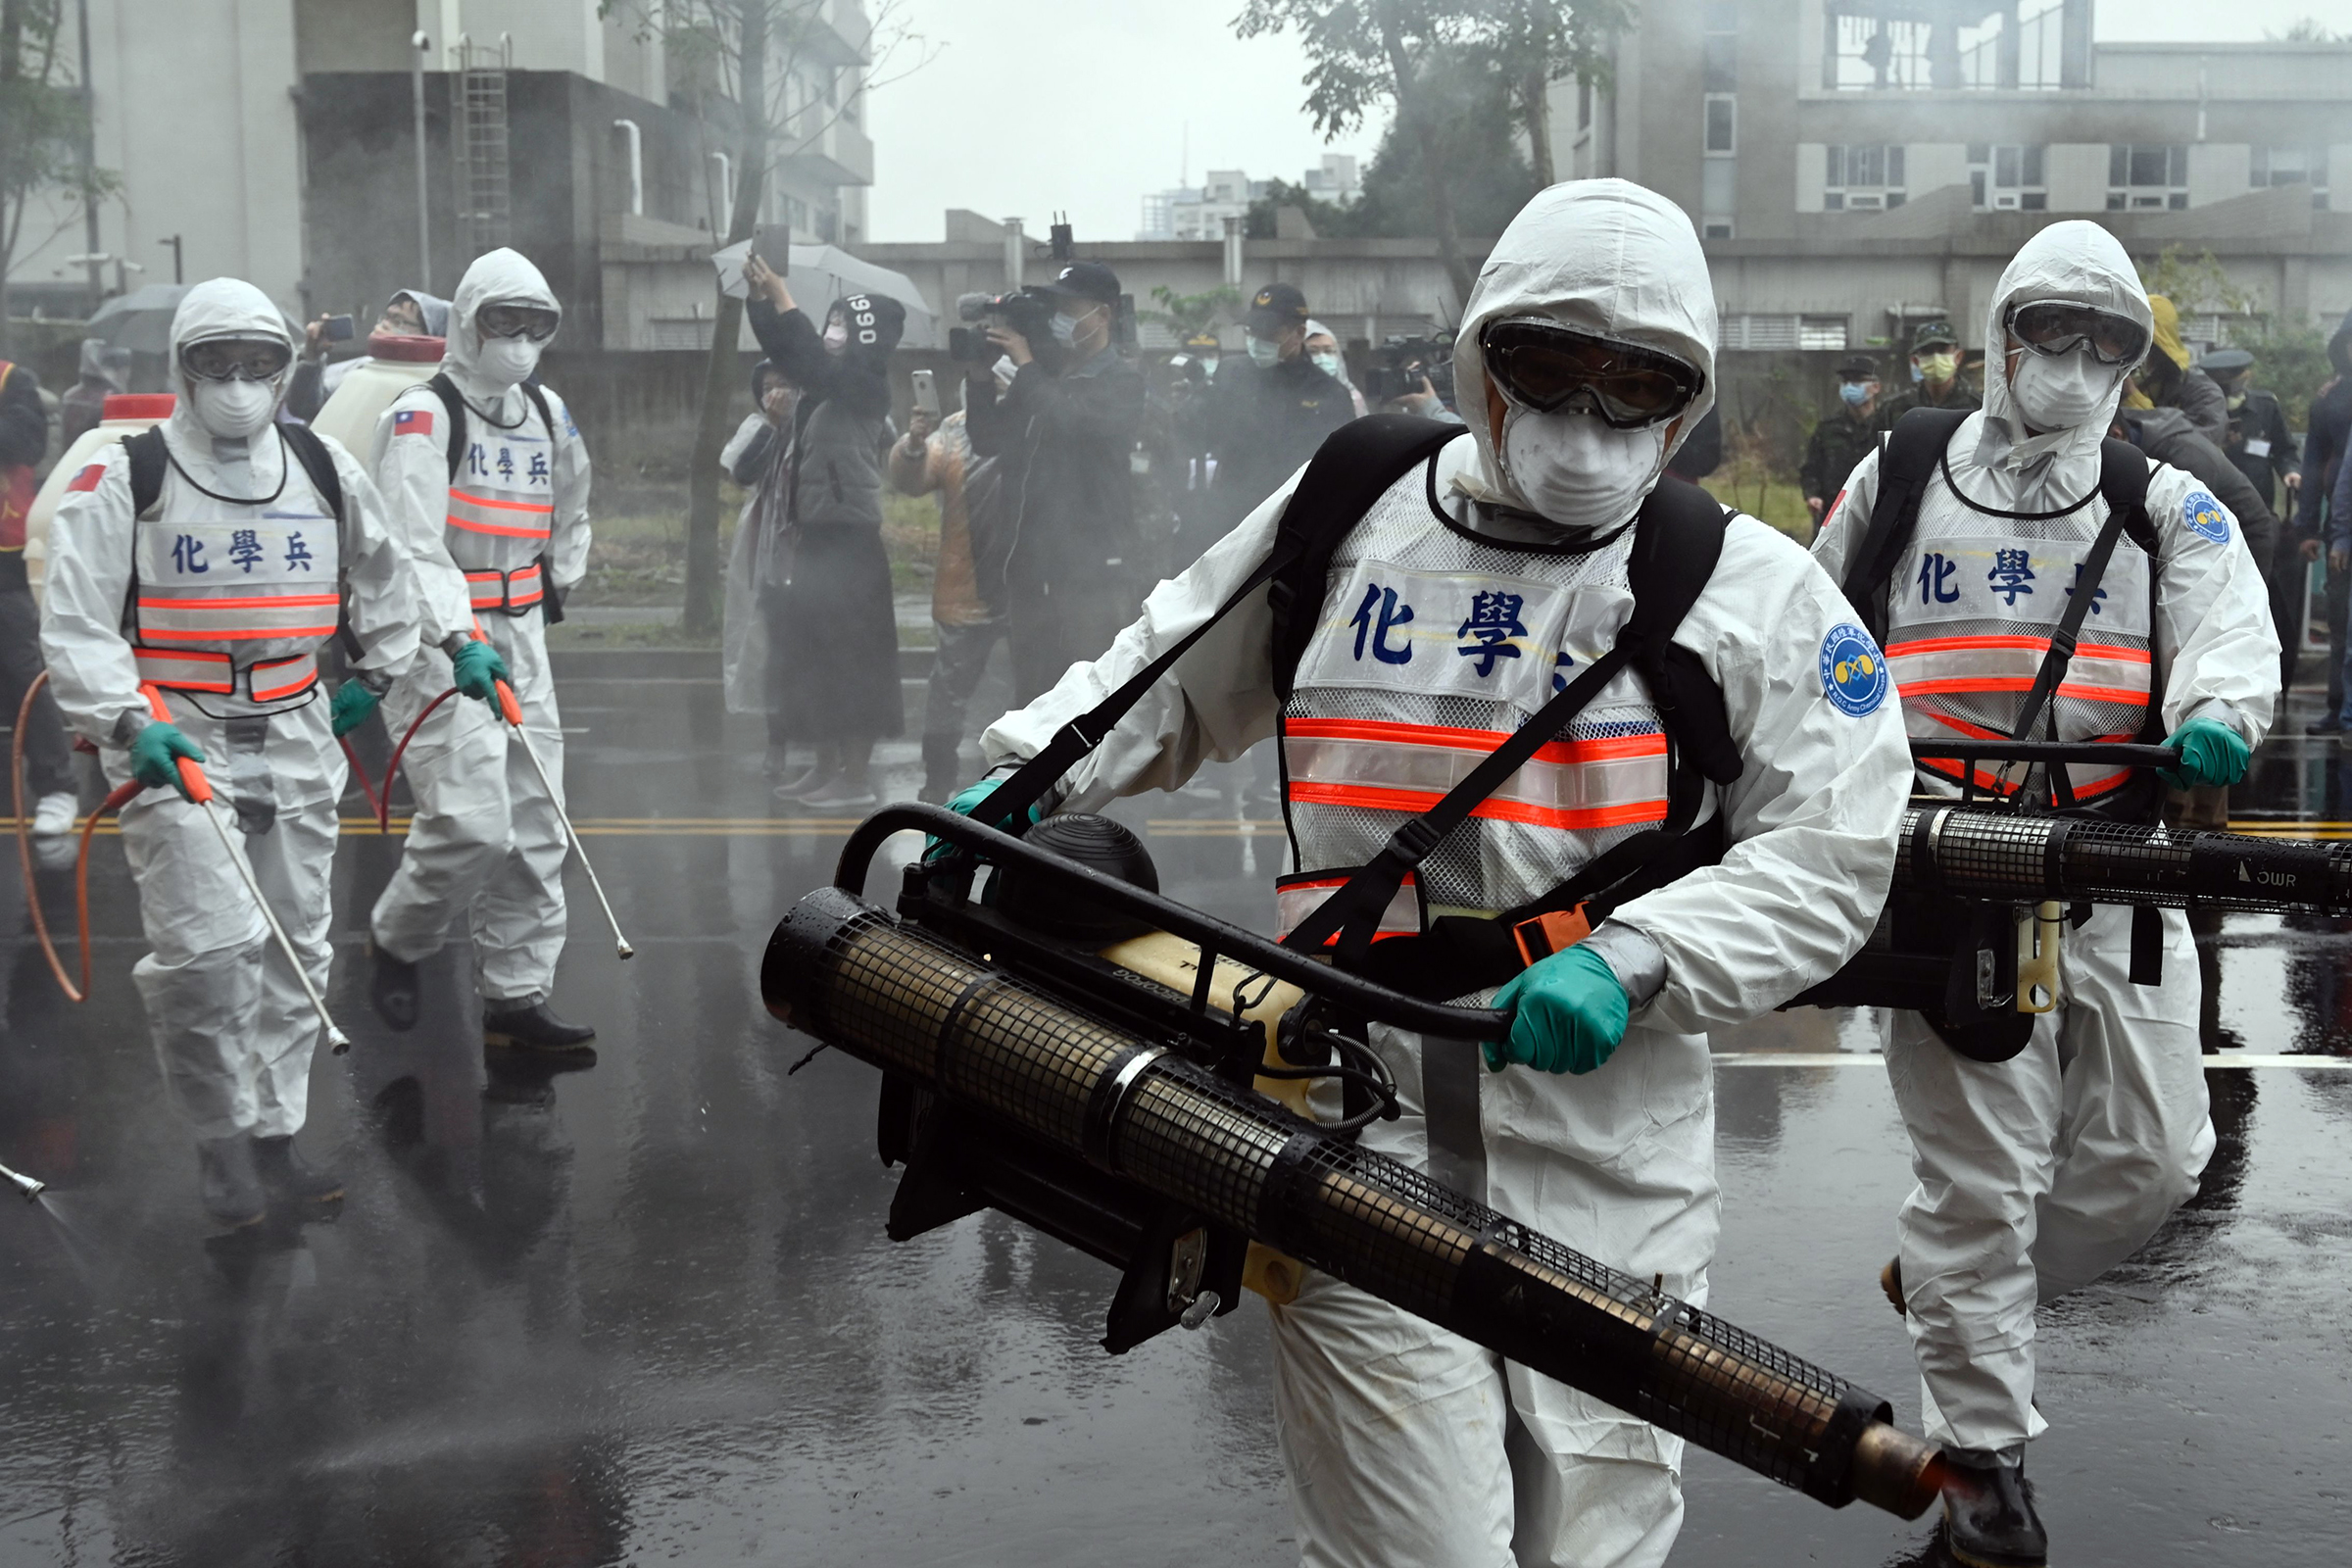 Soldiers from the military's chemical units take part in a drill to prevent the spread of the COVID-19 coronavirus, in Xindian district in Taiwan on March 14, 2020. (Sam Yeh—AFP via Getty Images)